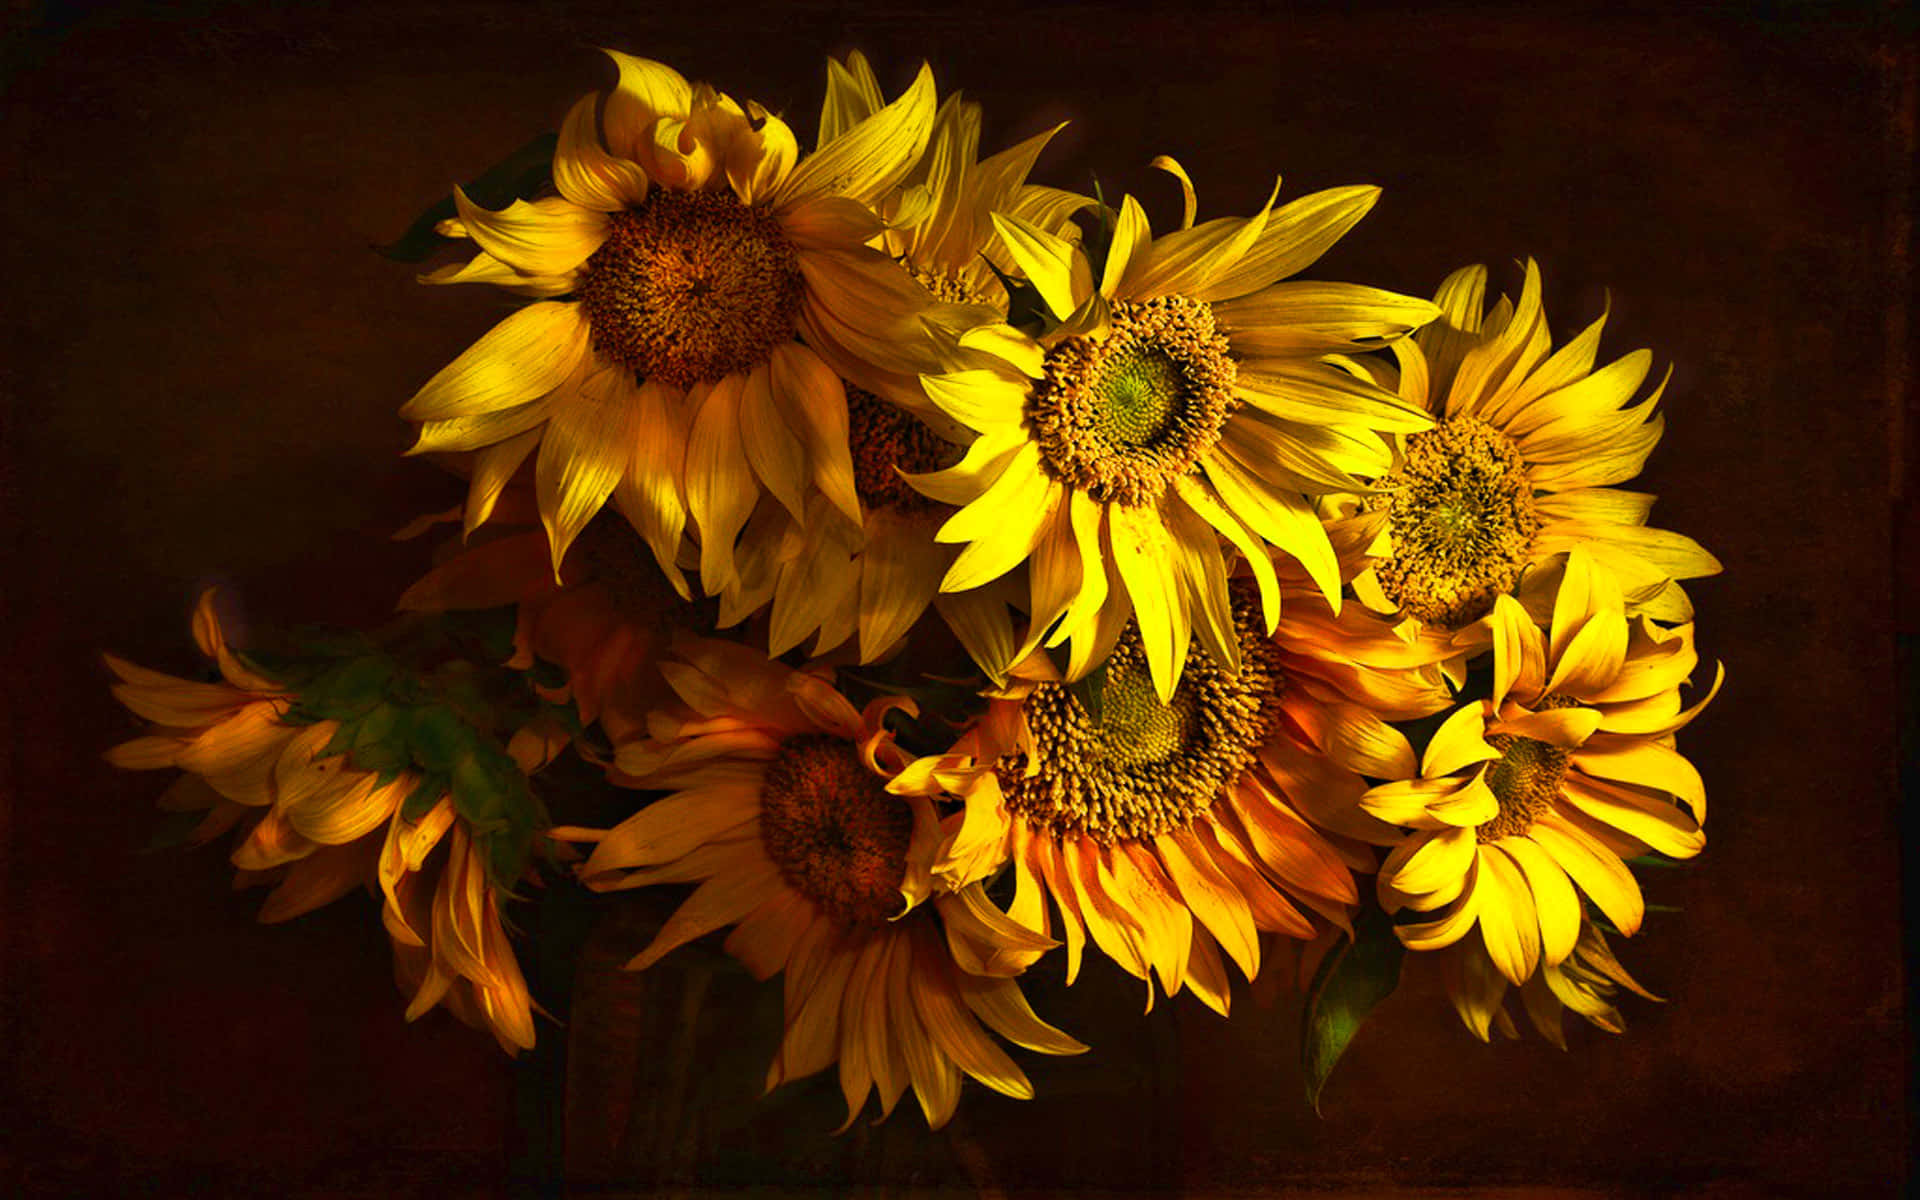 A Vase Of Sunflowers